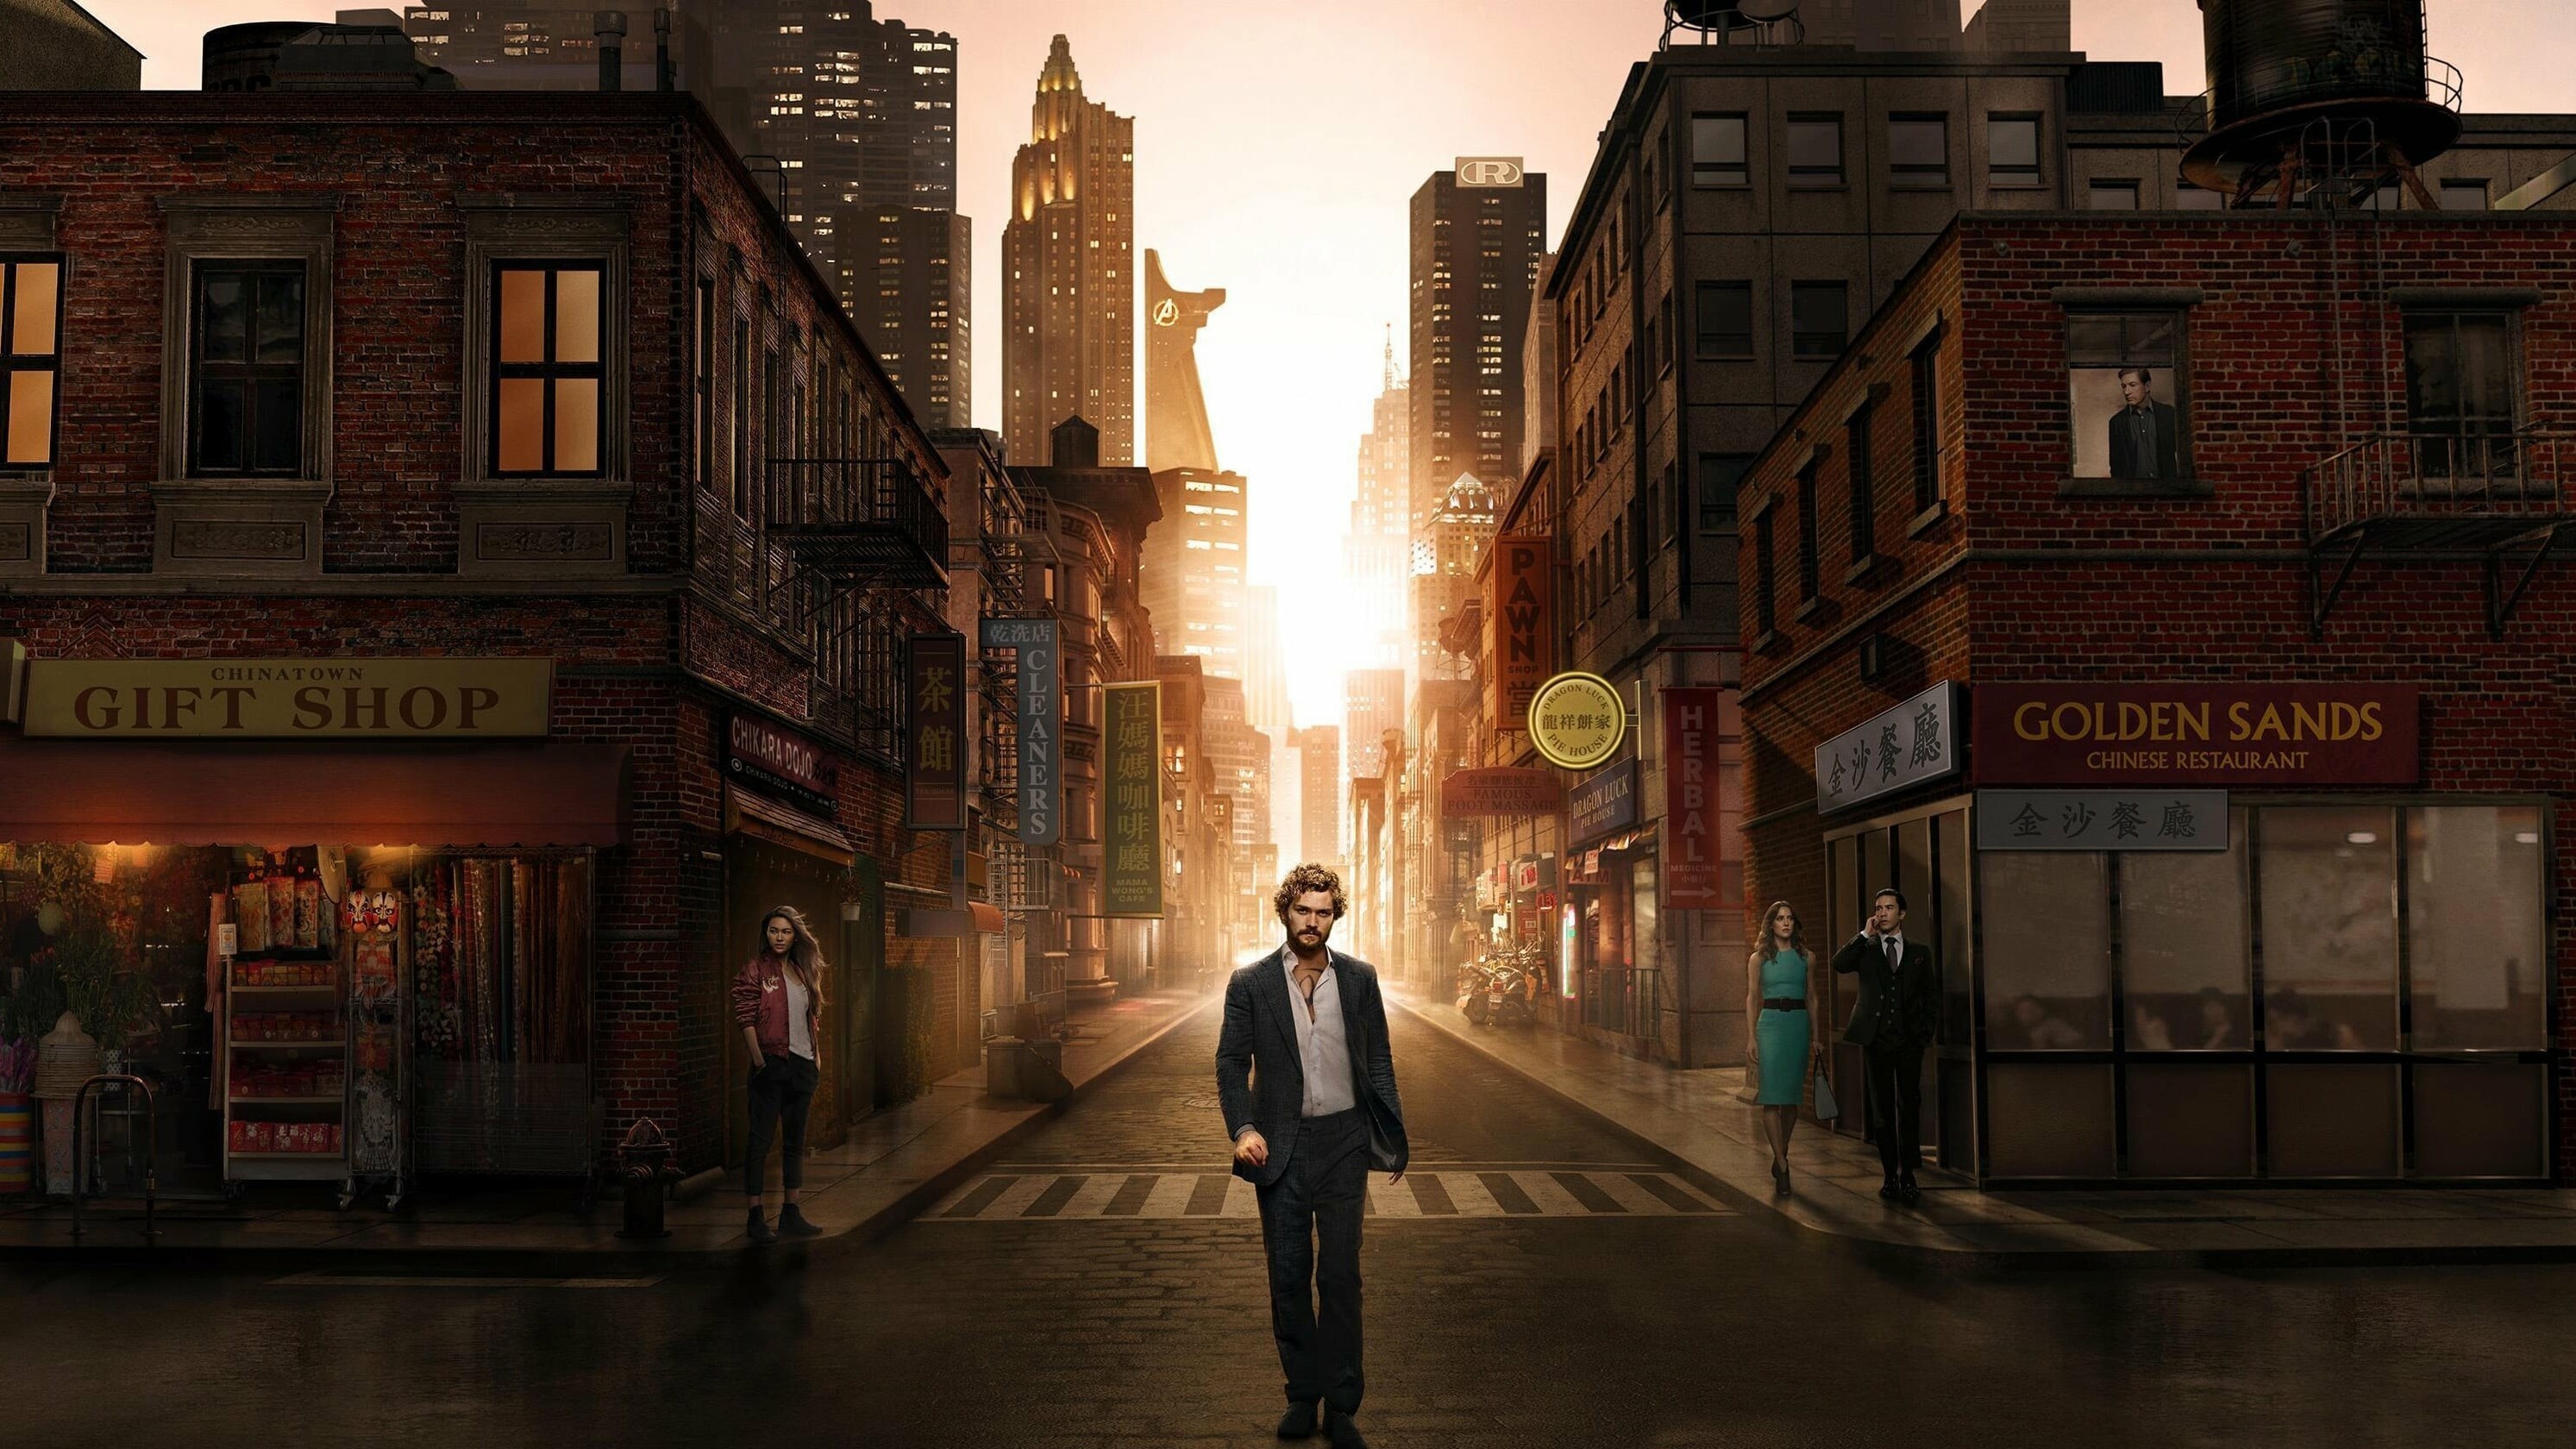 Iron Fist: Marvel's TV Series 2017-2018, Based on the MC character. 2990x1680 HD Background.